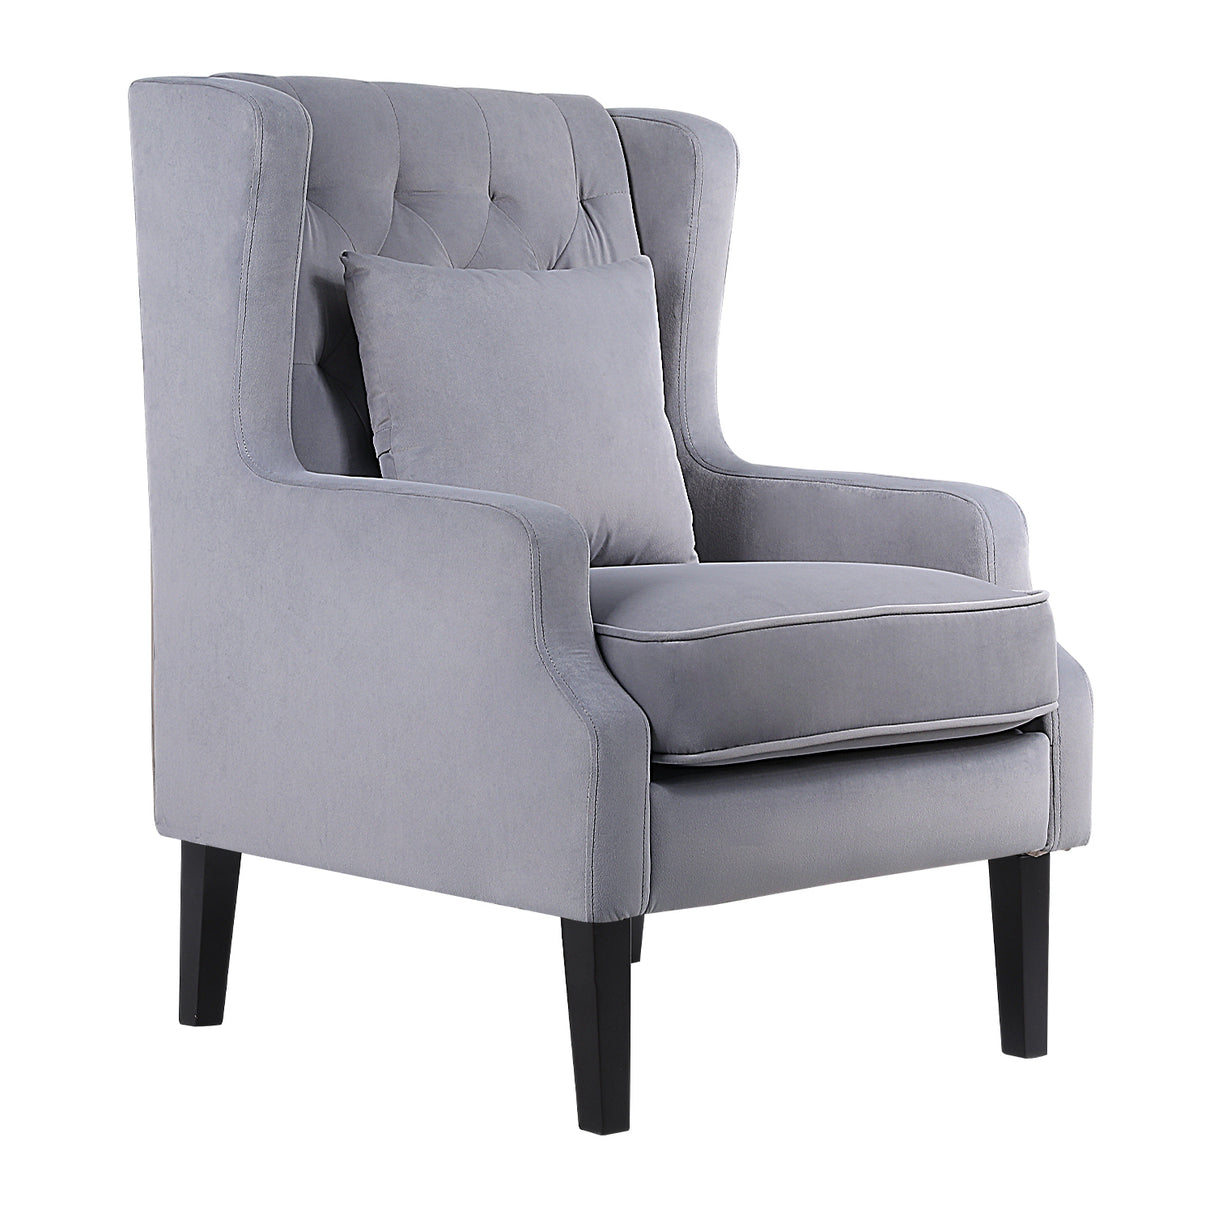 Vanbow.Modern chair with backrest, Bedroom, Living room, Reading chair(Light Grey) - Home Elegance USA